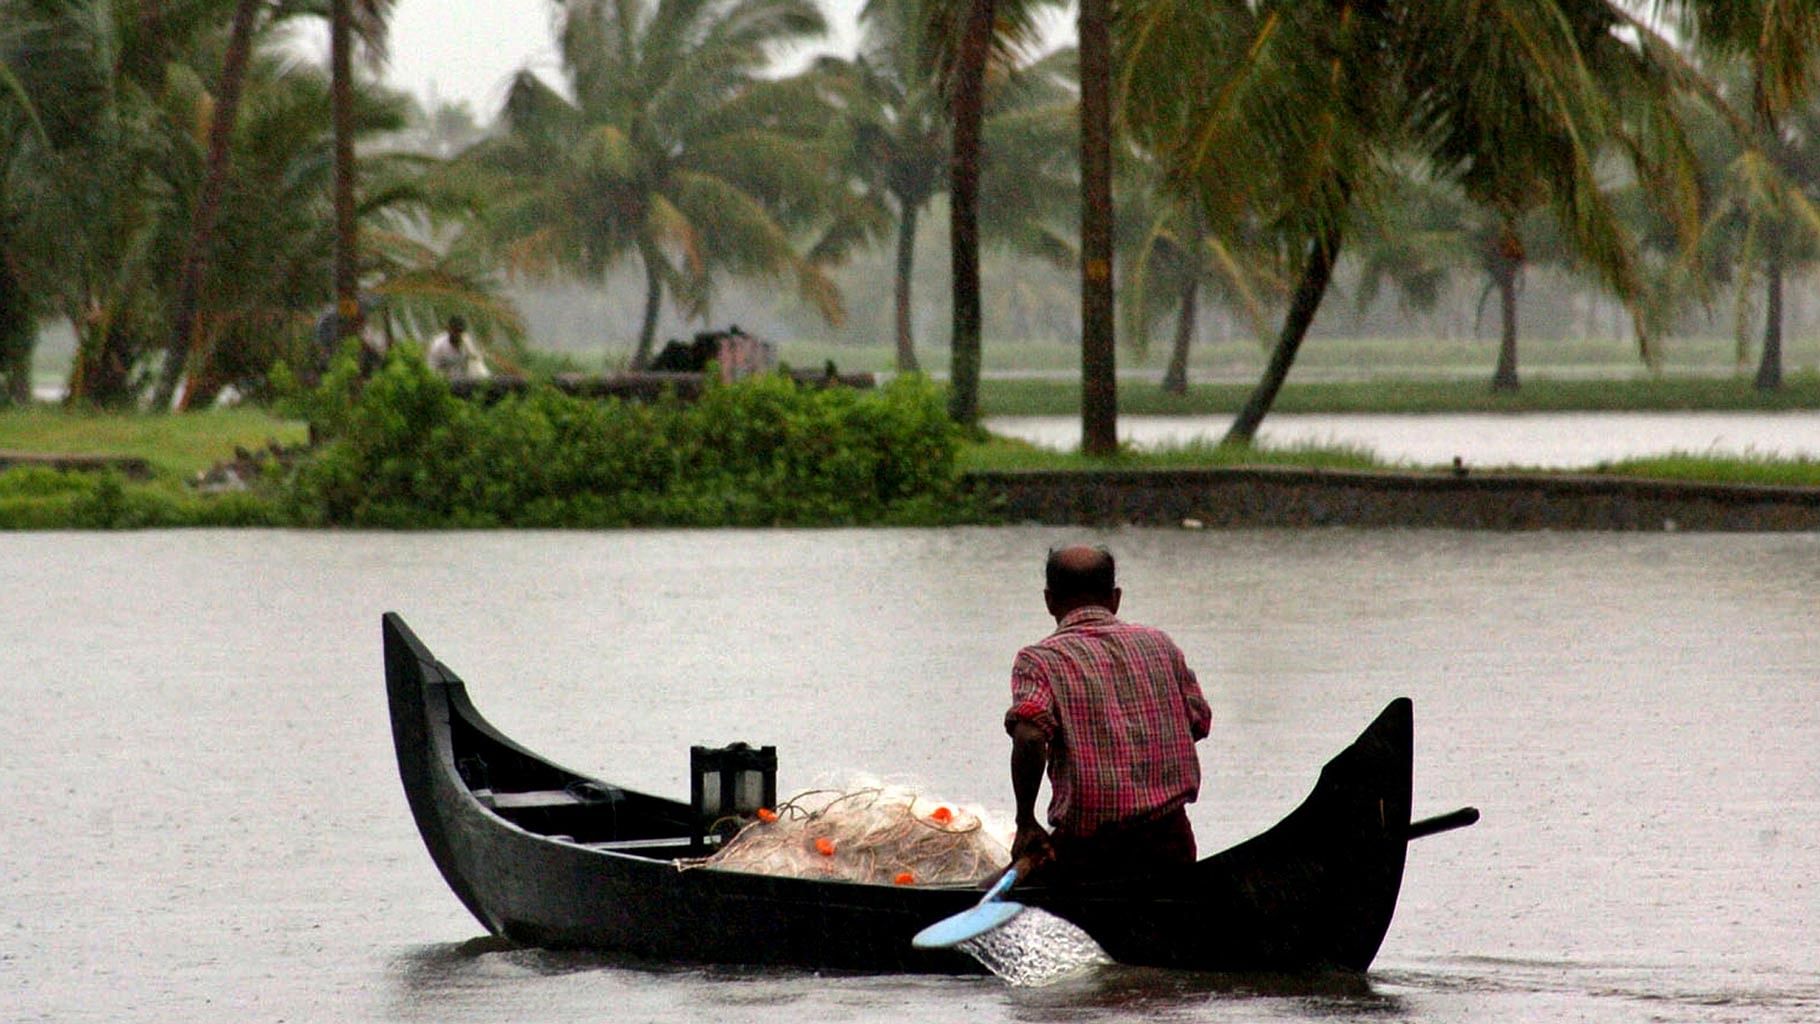 File photo of a fisherman rowing his boat during monsoons in Alleppy, Kerala.